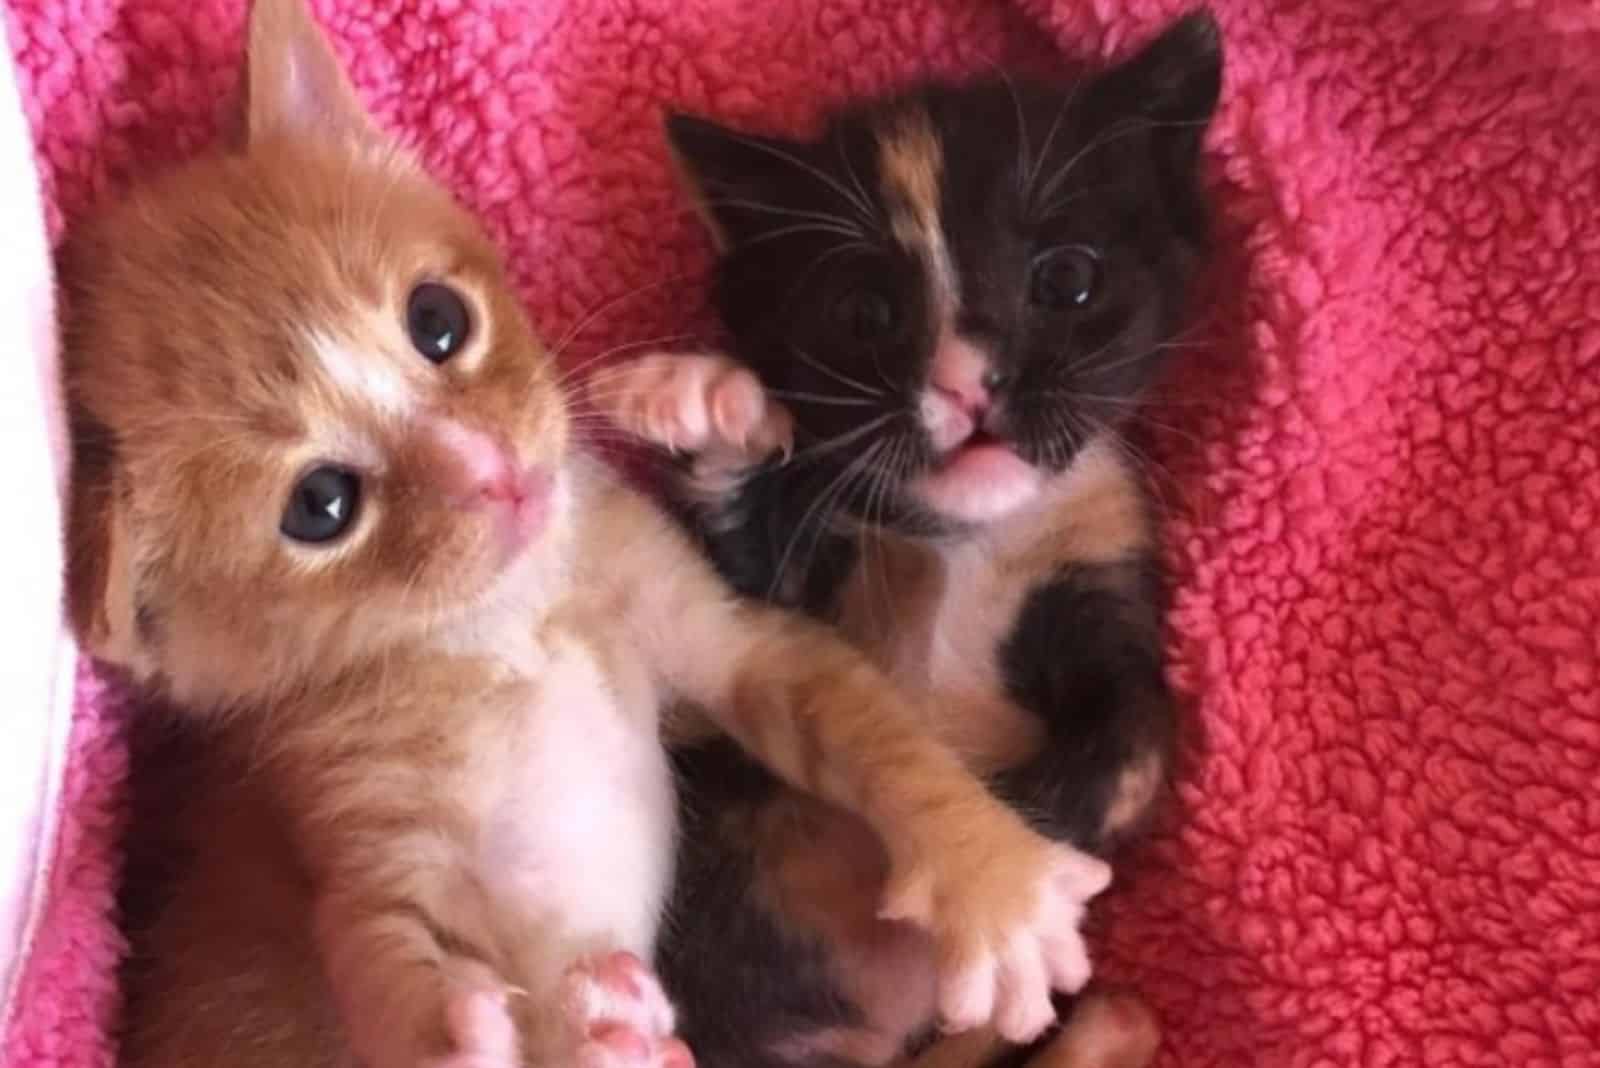 two kittens are lying on a pink blanket